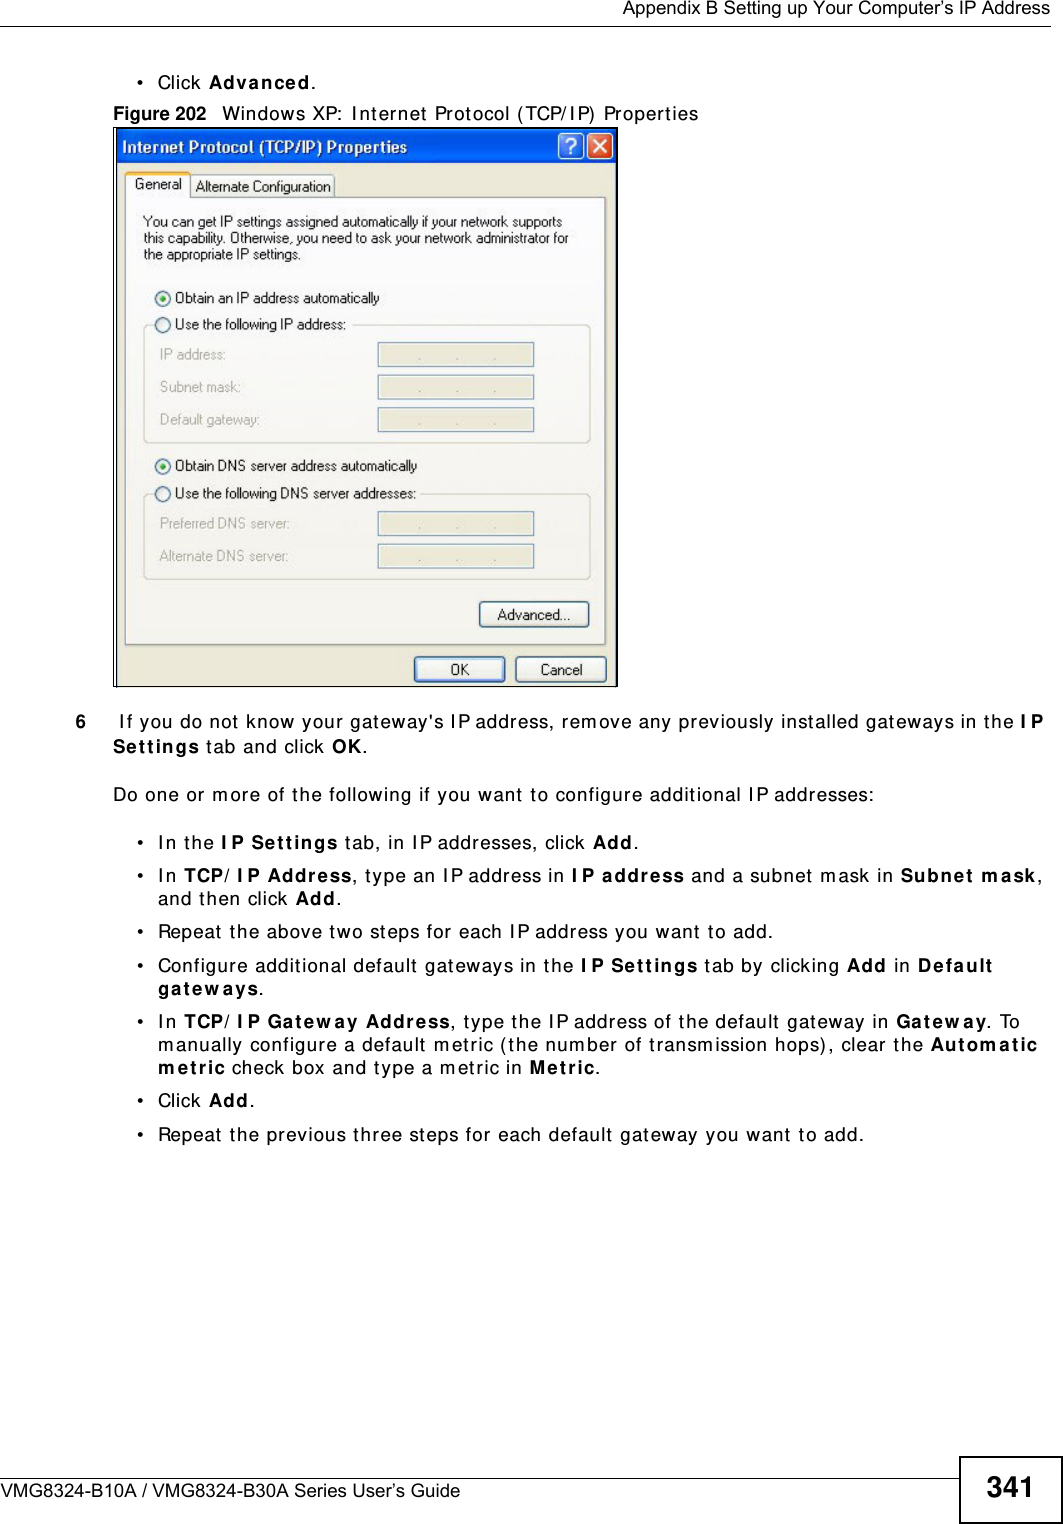  Appendix B Setting up Your Computer’s IP AddressVMG8324-B10A / VMG8324-B30A Series User’s Guide 341• Click Advan ce d.Figure 202   Windows XP:  I nt ernet  Prot ocol ( TCP/ I P)  Propert ies6 I f you do not know your gat eway&apos;s I P address, rem ove any previously inst alled gat eways in t he I P Se t t in gs tab and click OK.Do one or m ore of t he following if you want  t o configur e addit ional I P addresses:• In the I P Set t in gs tab, in I P addresses, click Add.• In TCP/ I P Address, type an I P address in I P address and a subnet m ask in Subne t m a sk , and then click Add.• Repeat t he above t wo steps for each I P address you want  t o add.• Configure additional default  gateways in t he I P Se tt ings t ab by clicking Add in Defa ult ga t ew a y s.• In TCP/ I P Gat ew ay Address, t ype the I P address of t he default  gateway in Gat e w a y. To m anually configure a default m etric ( the number of transm ission hops) , clear the Autom a t ic m e t r ic check box and type a m et ric in M e t ric.• Click Add. • Repeat  t he previous three st eps for each default  gateway you want  t o add.